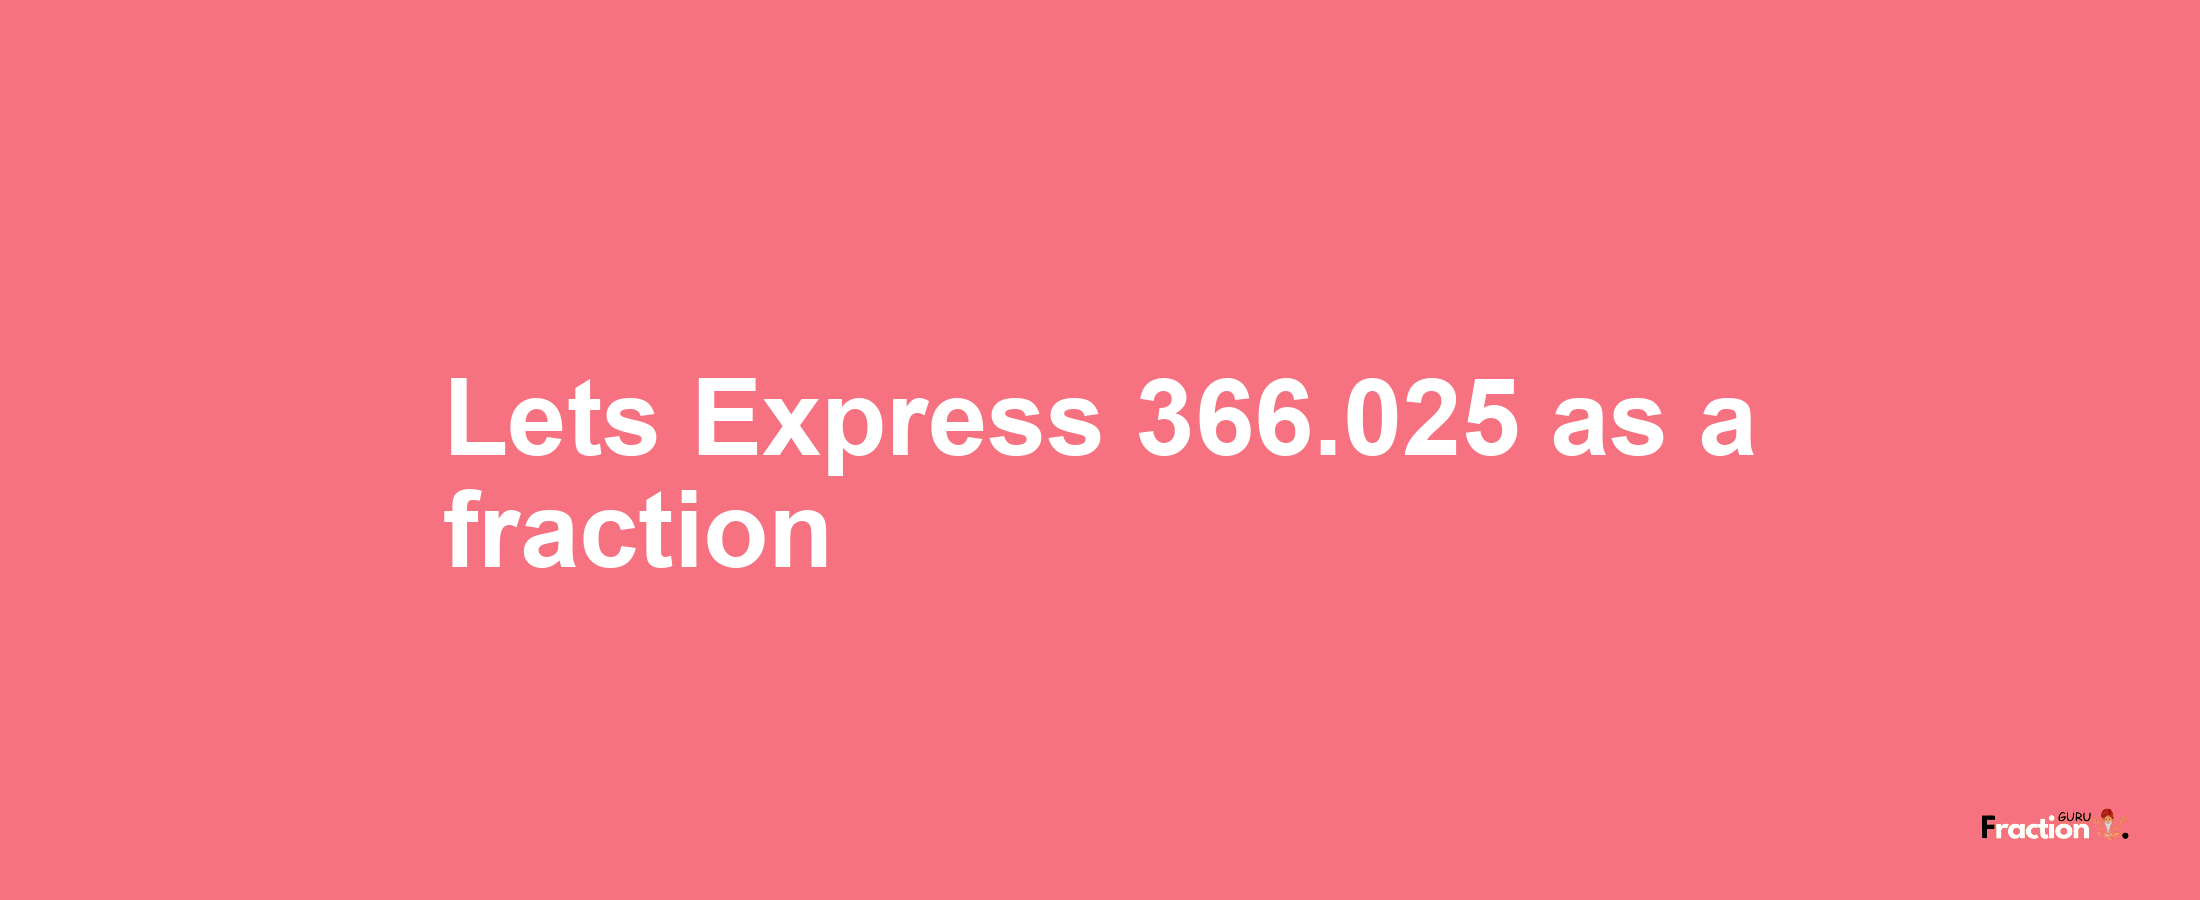 Lets Express 366.025 as afraction